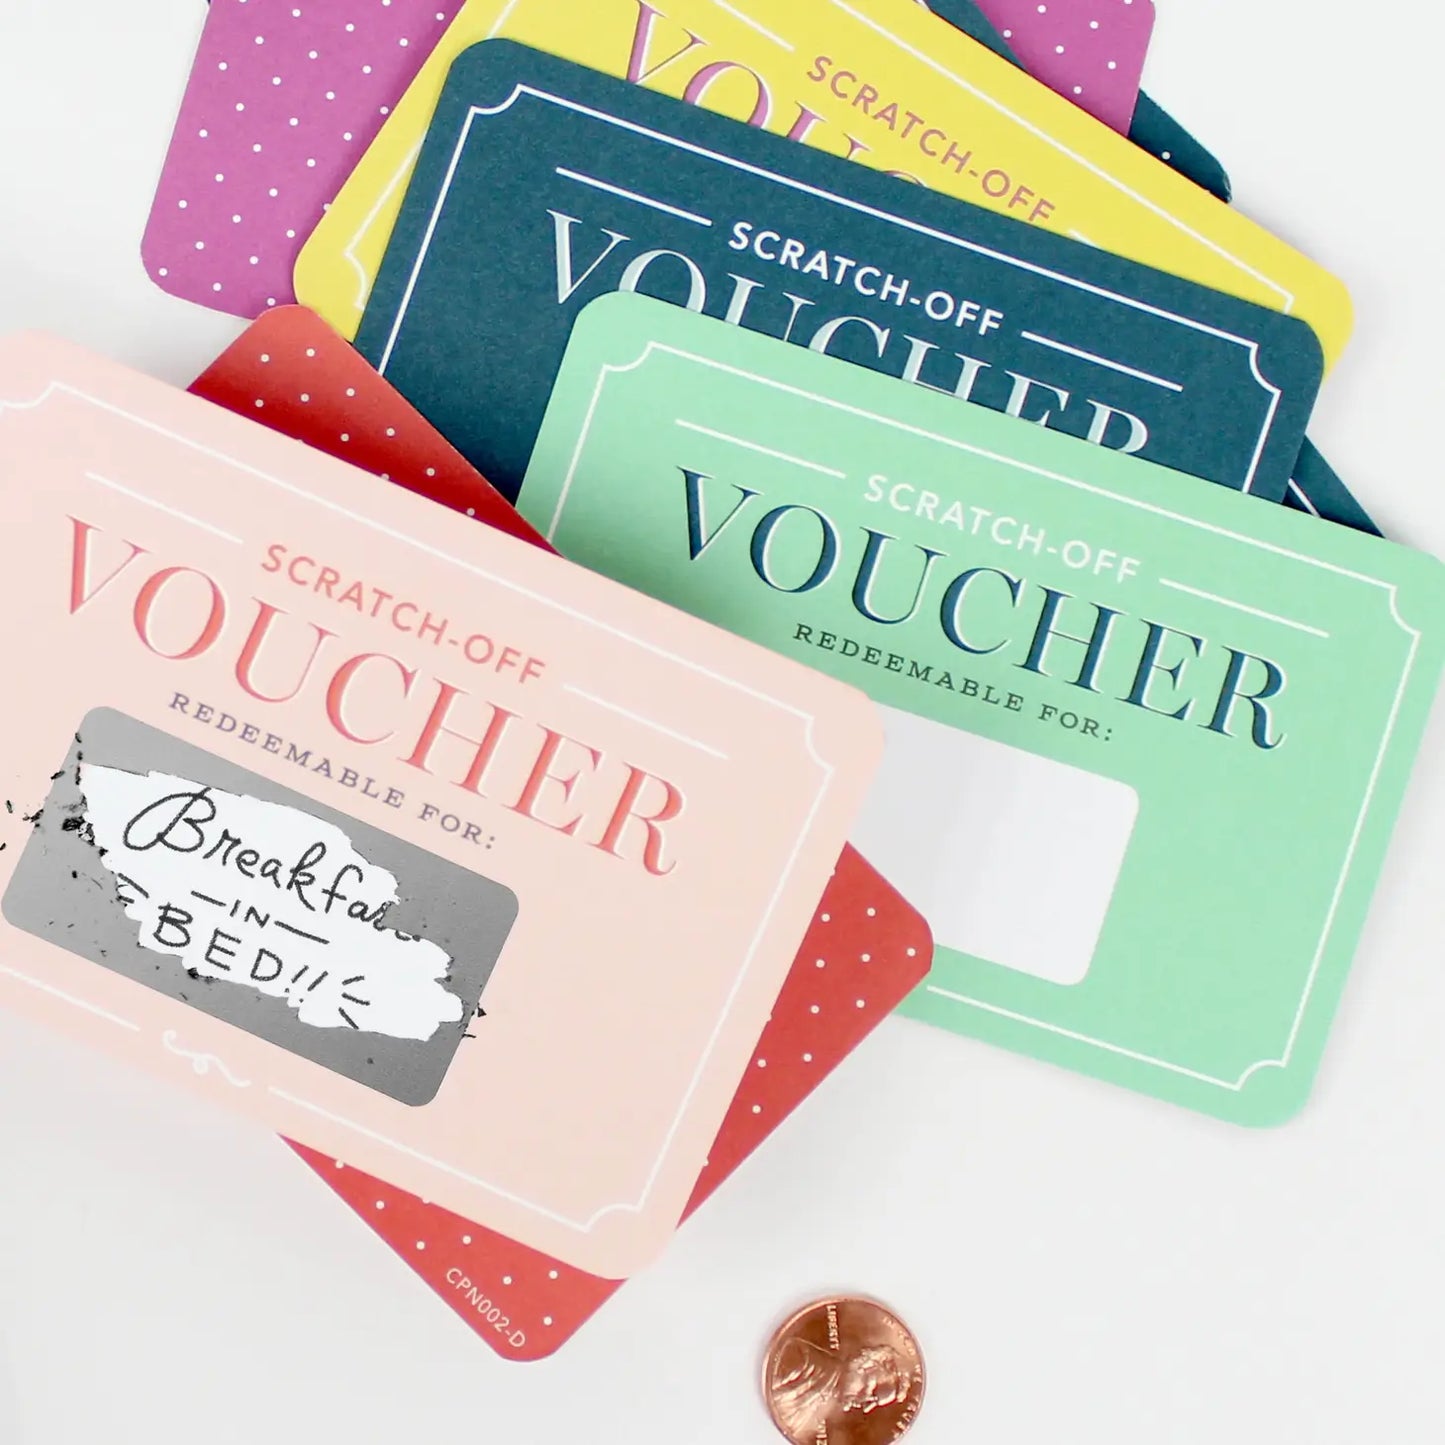 Scratch-off Vouchers For Any Occasion - 12 pk